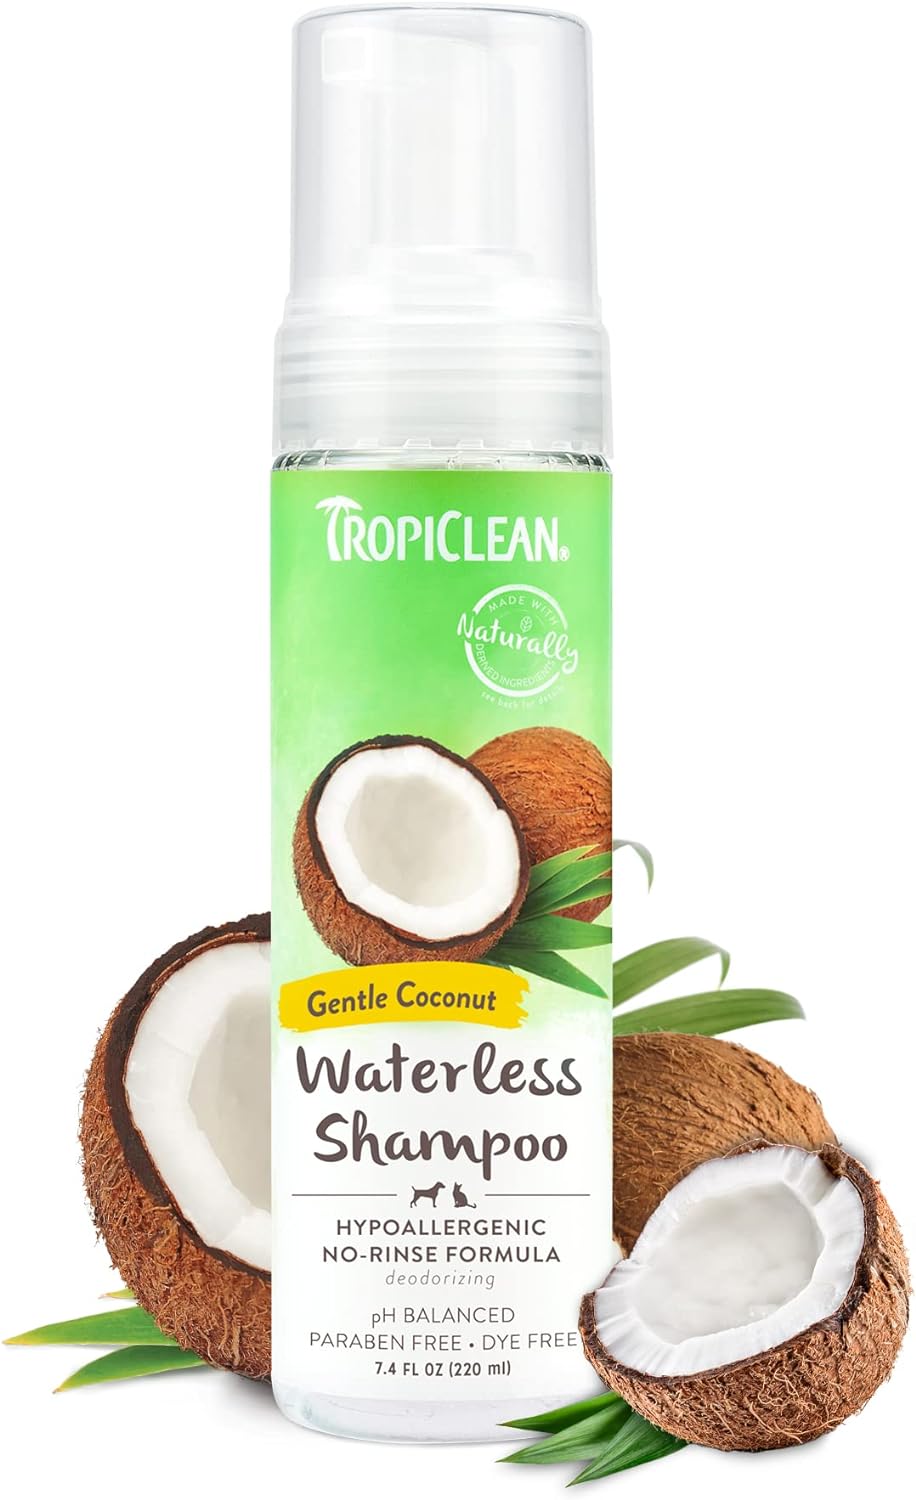 TropiClean Dog Shampoo Grooming Supplies - Hypoallergenic Waterless Shampoo - No Water Required - Dry Shampoo For Puppies & Kittens - Used by Groomers - Gentle Coconut, 220ml?TRHAWS7.4Z